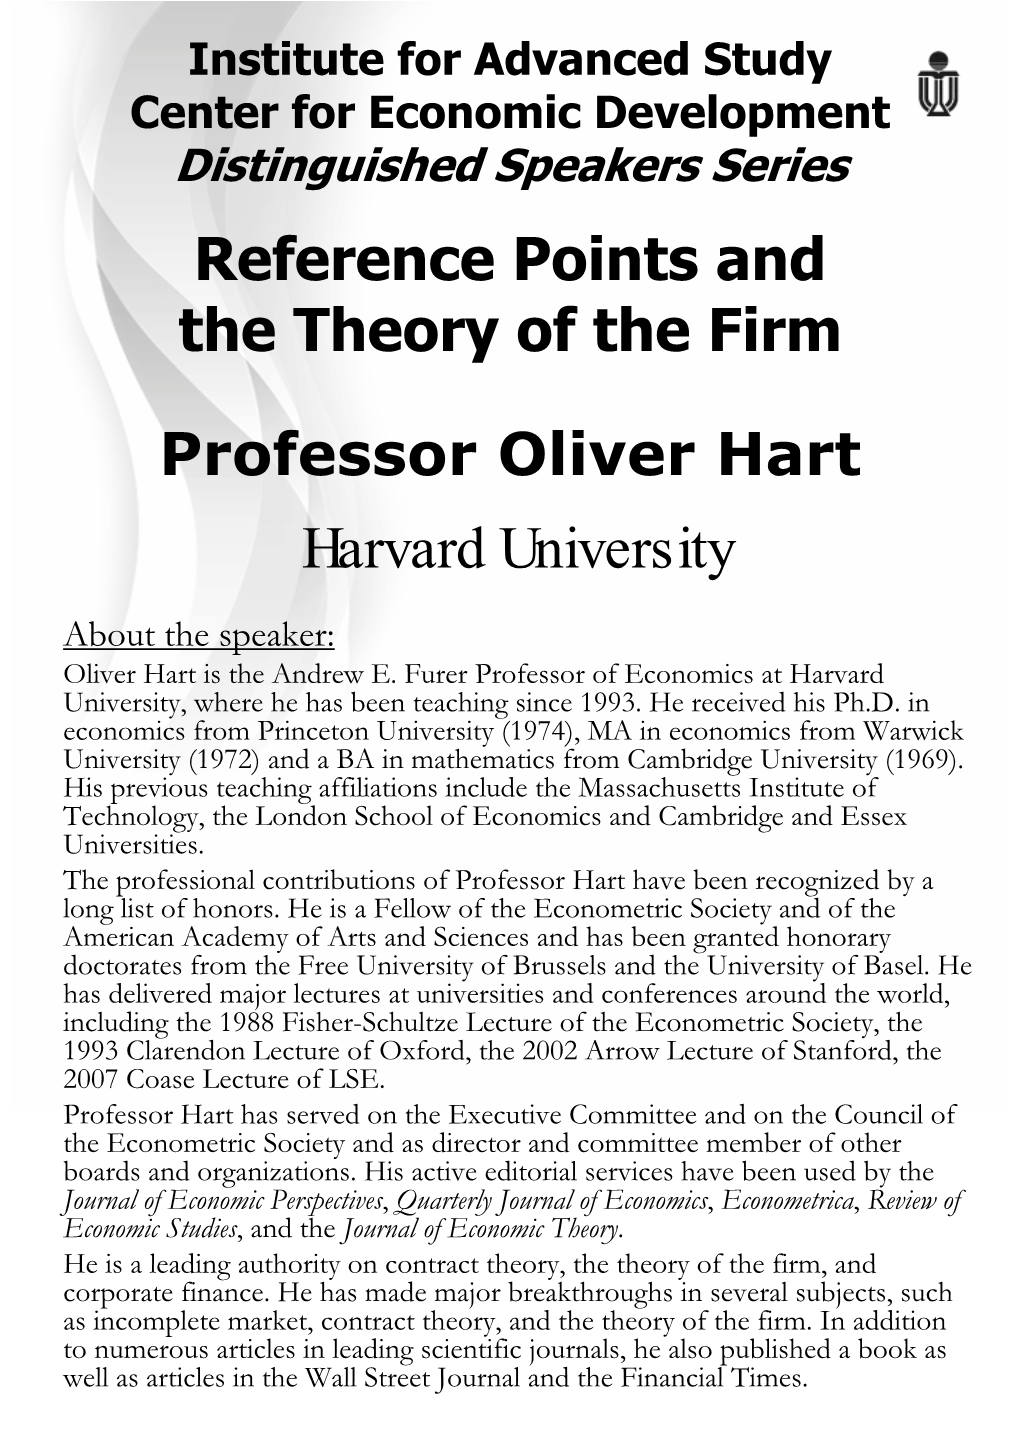 Reference Points and the Theory of the Firm Professor Oliver Hart